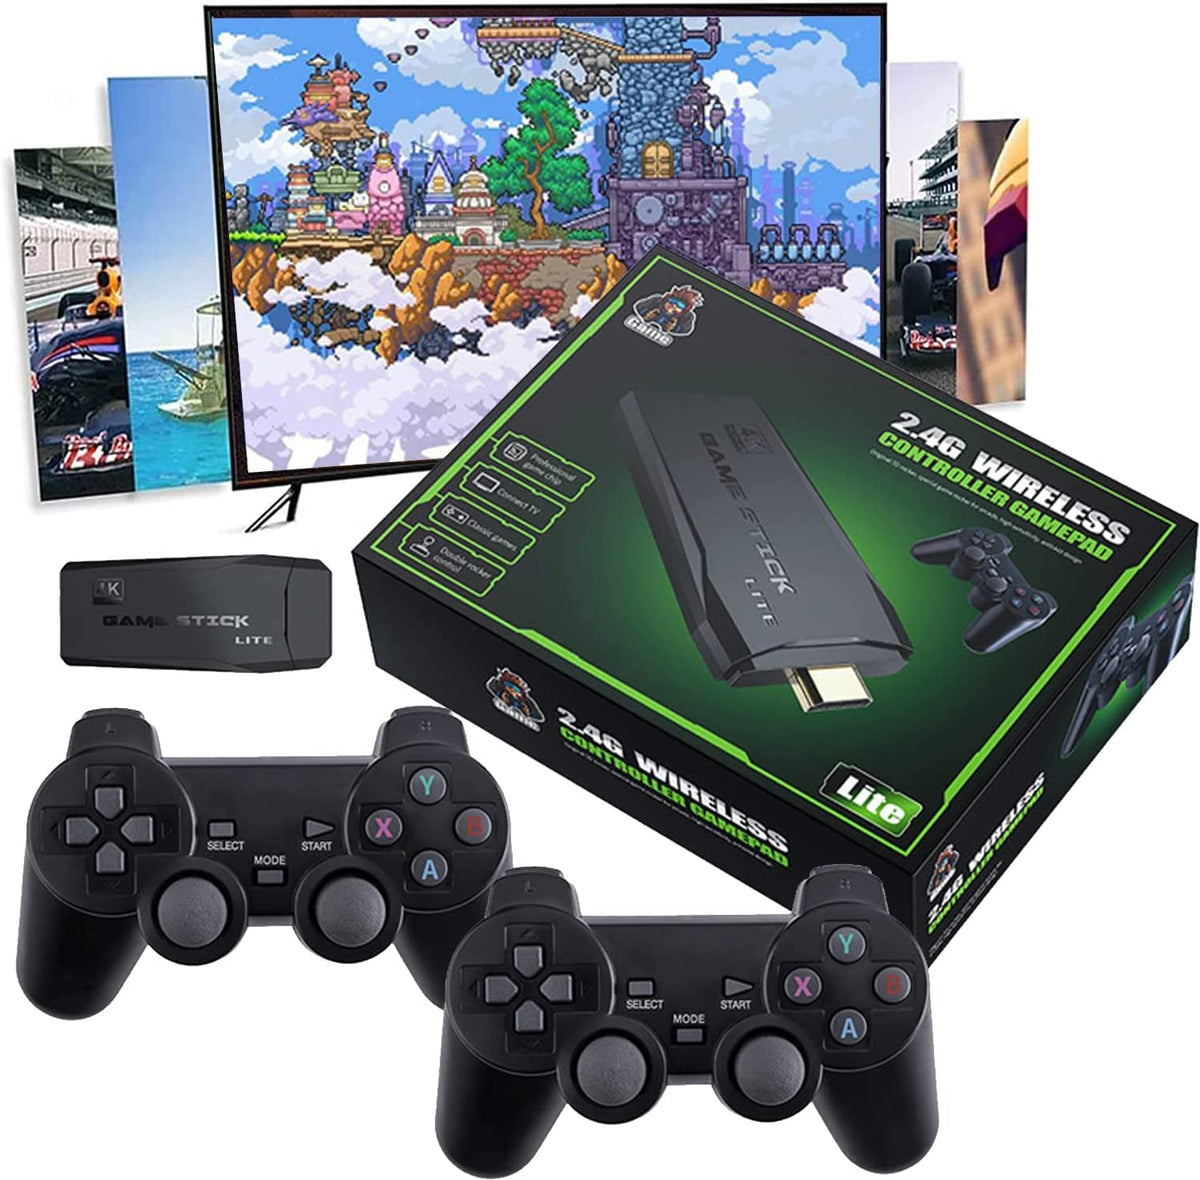 M8 Video Game Console 64G 2.4G Double Wireless Stick 4K 20000+ Games Retro Game Controller